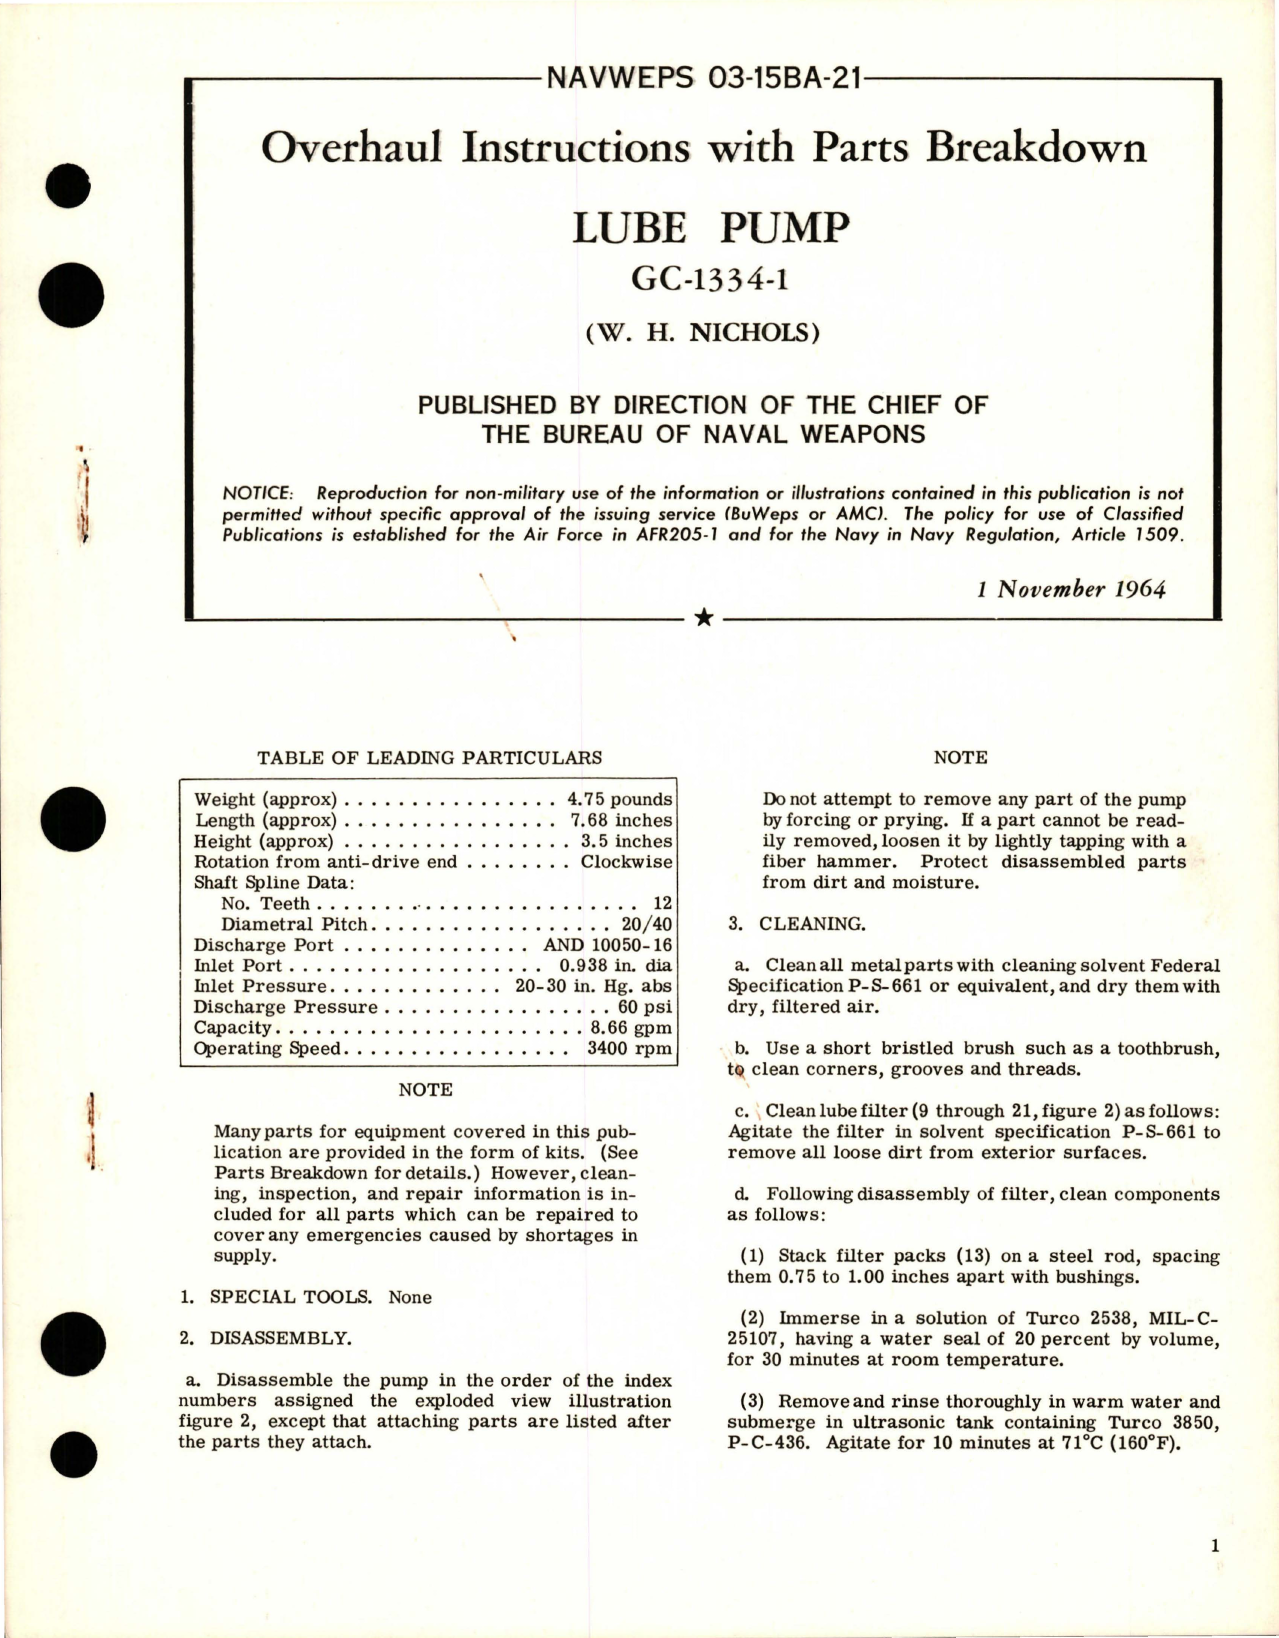 Sample page 1 from AirCorps Library document: Overhaul Instructions with Parts Breakdown for Lube Pump - GC-1334-1